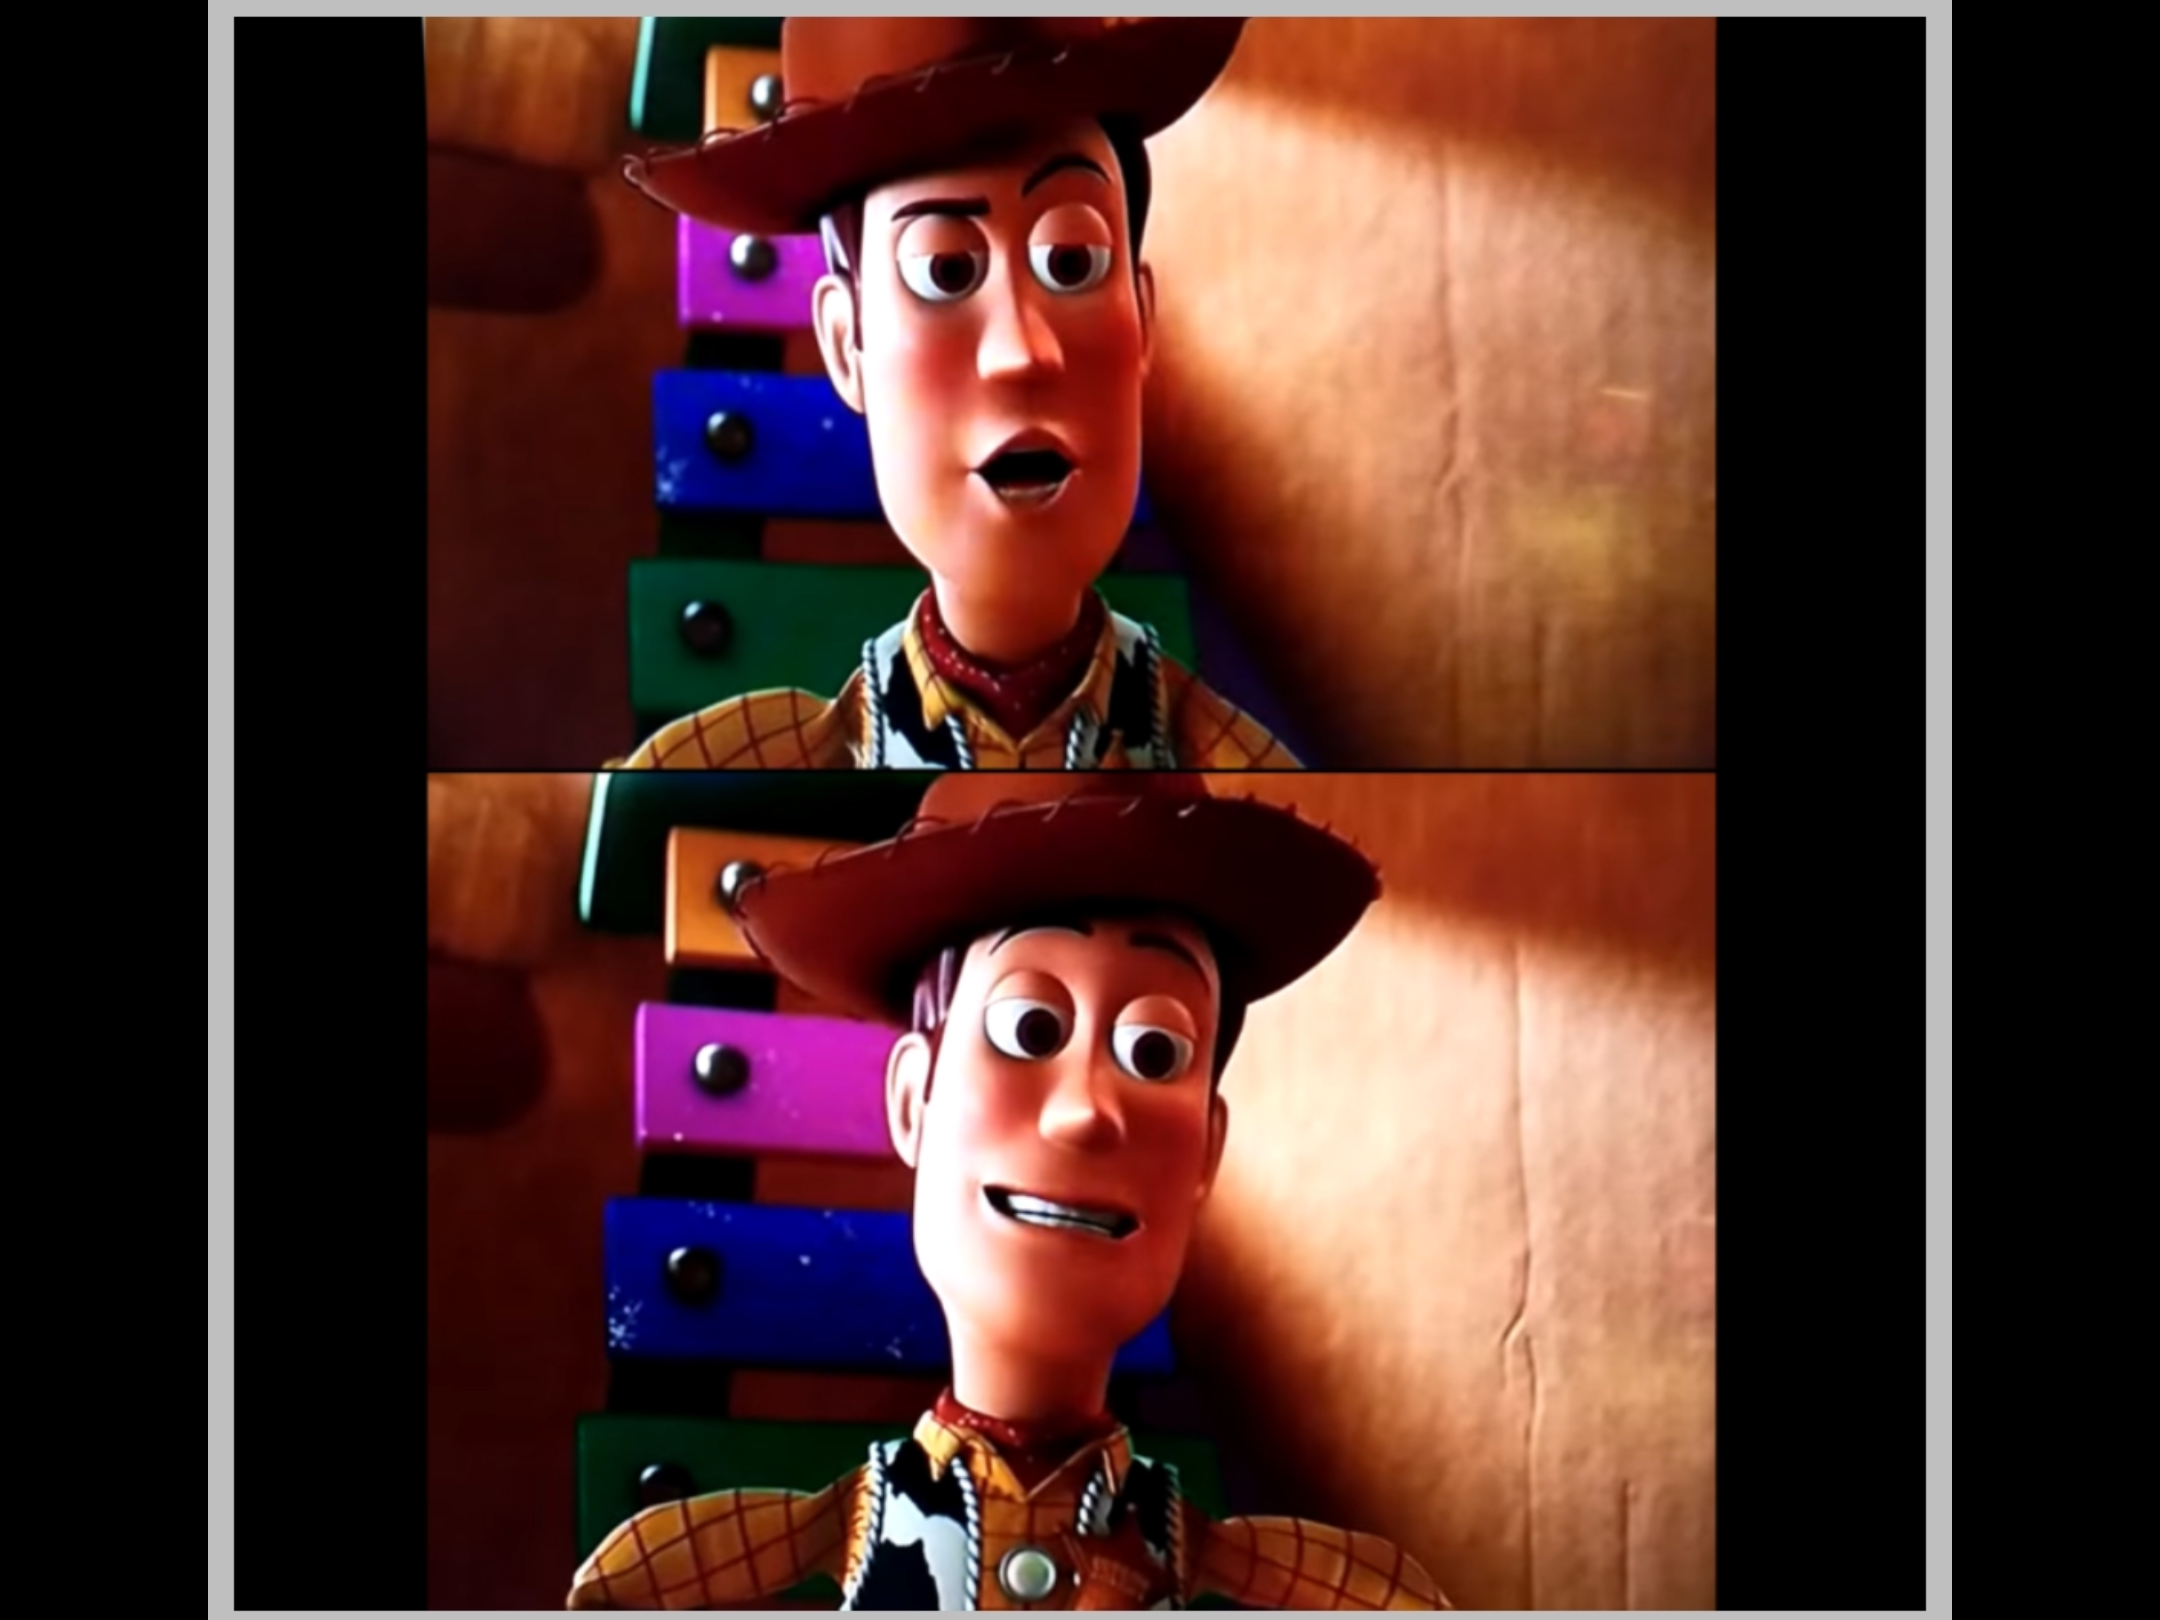 Toy story 3 meme Blank Template - Imgflip